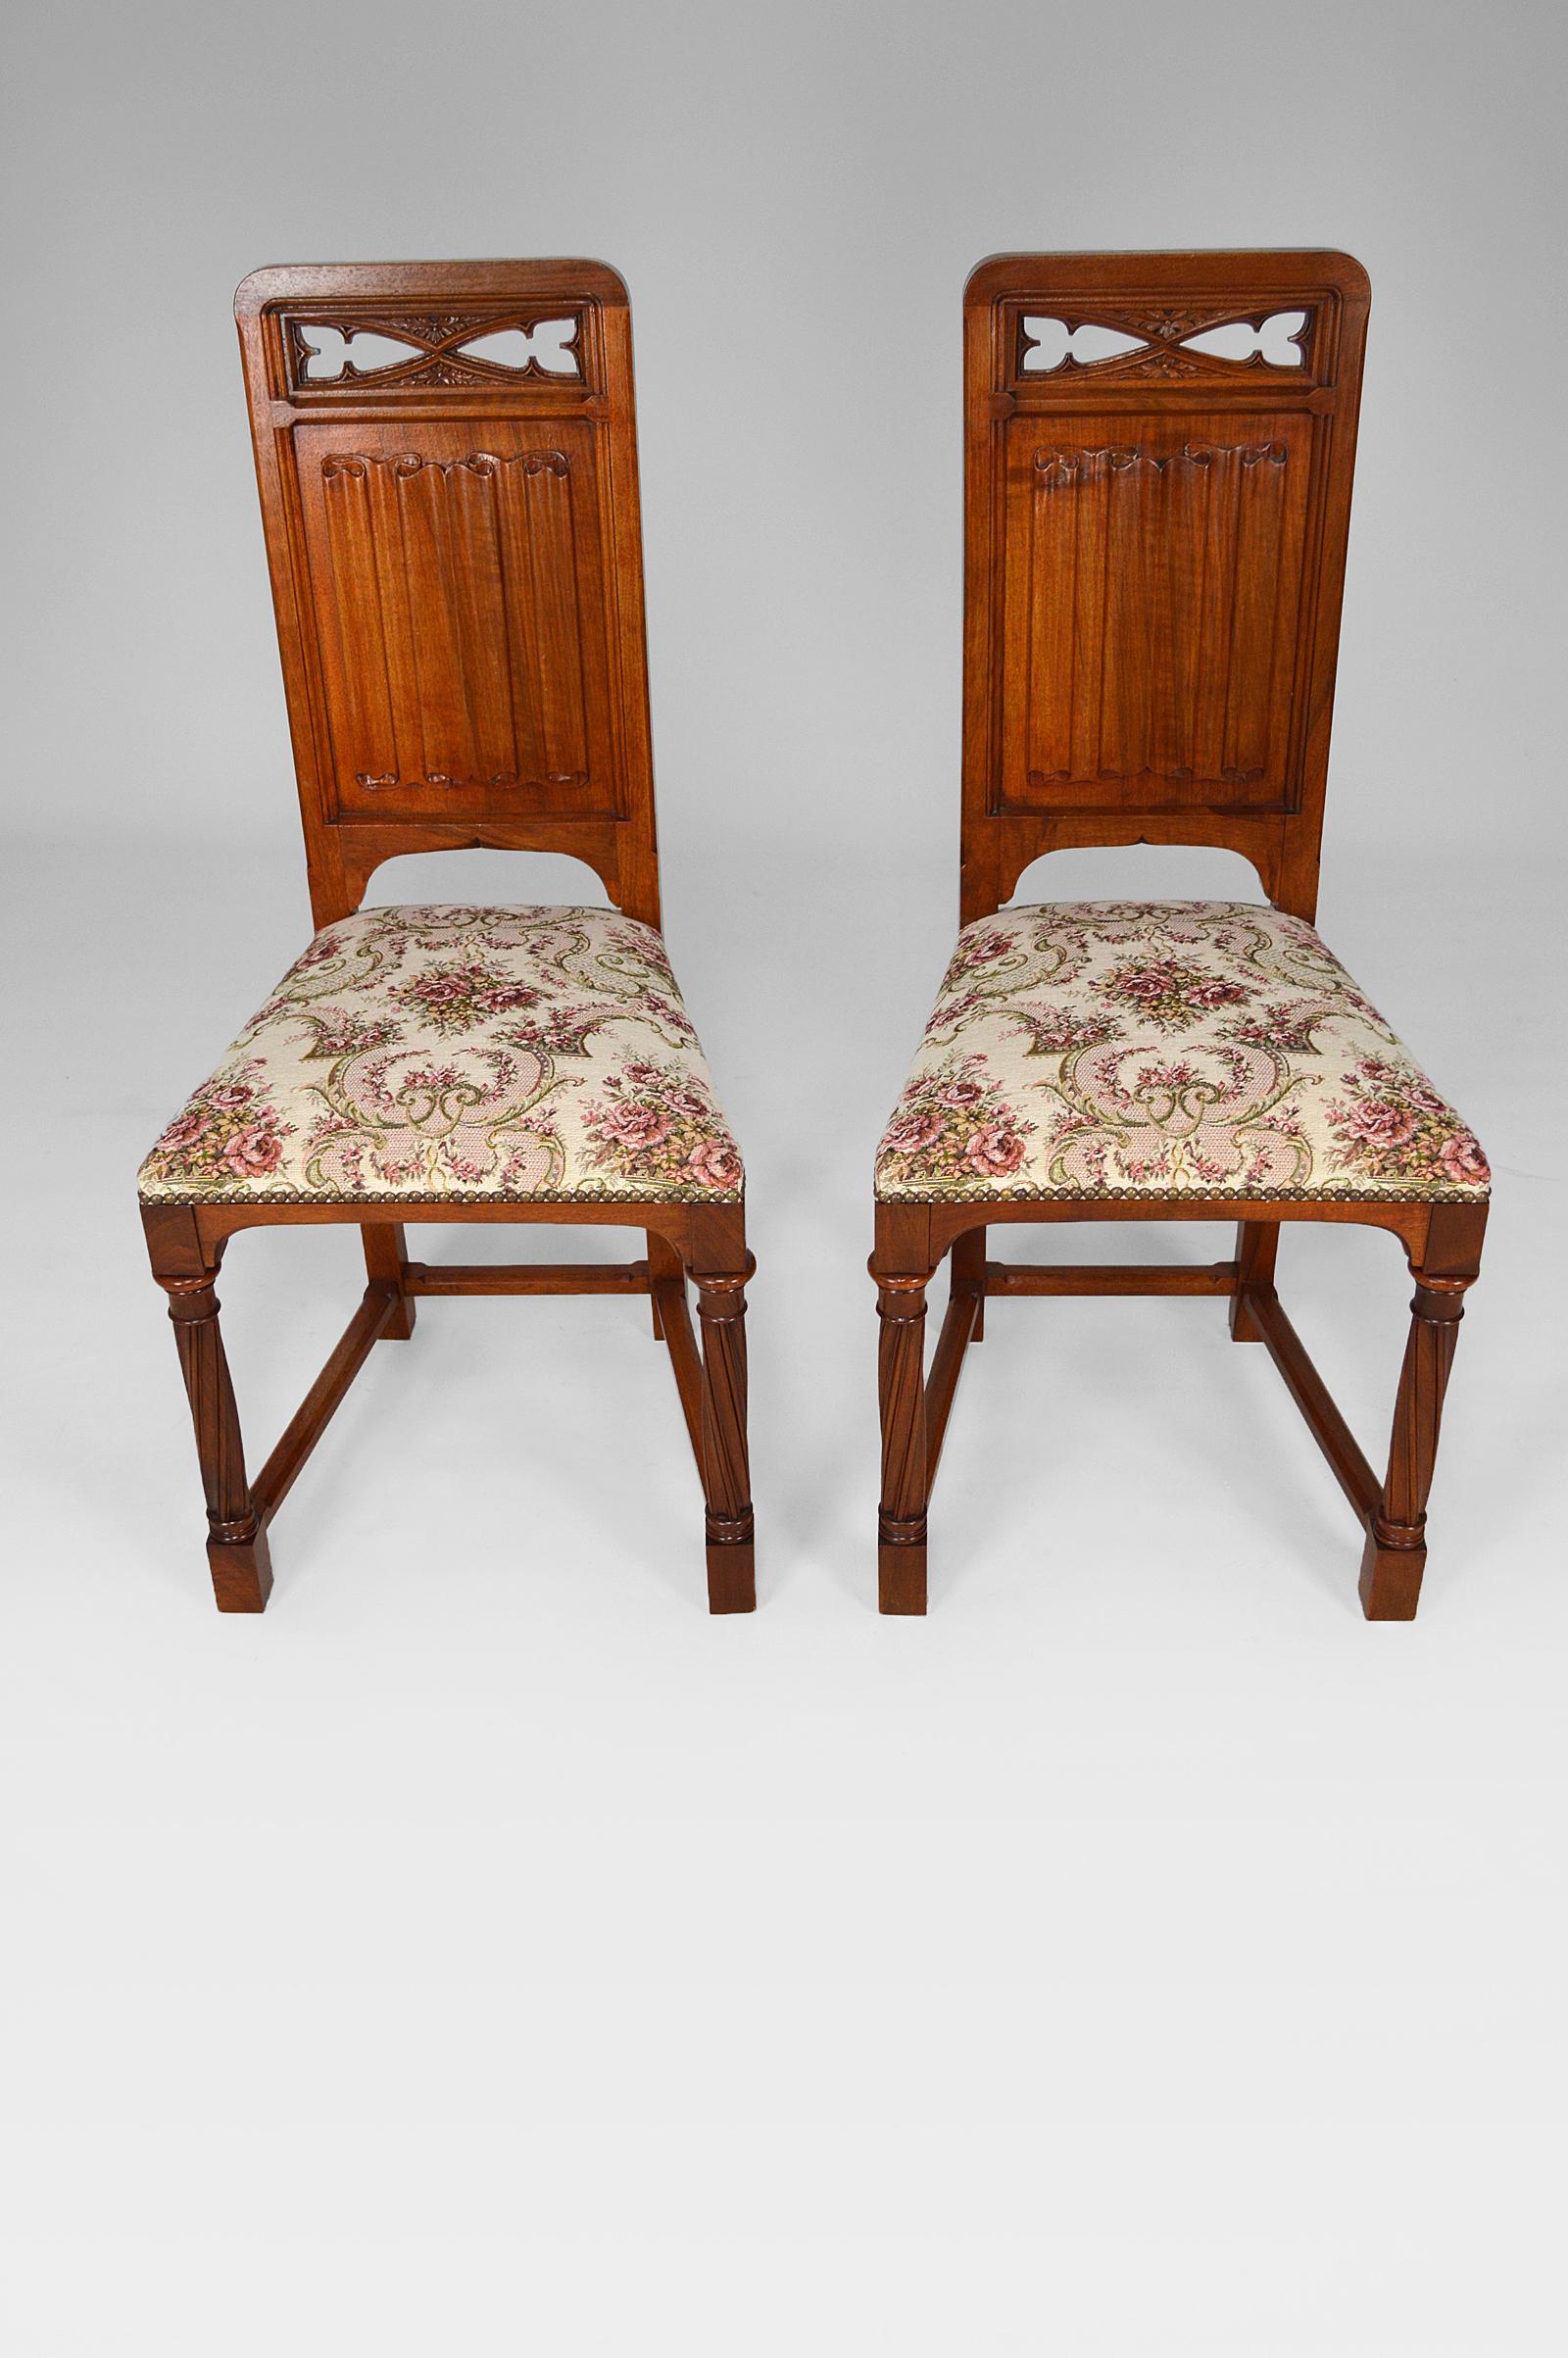 Late 19th Century Pair of Antique Victorian Gothic Revival Chairs in Carved Walnut, 19th Century For Sale